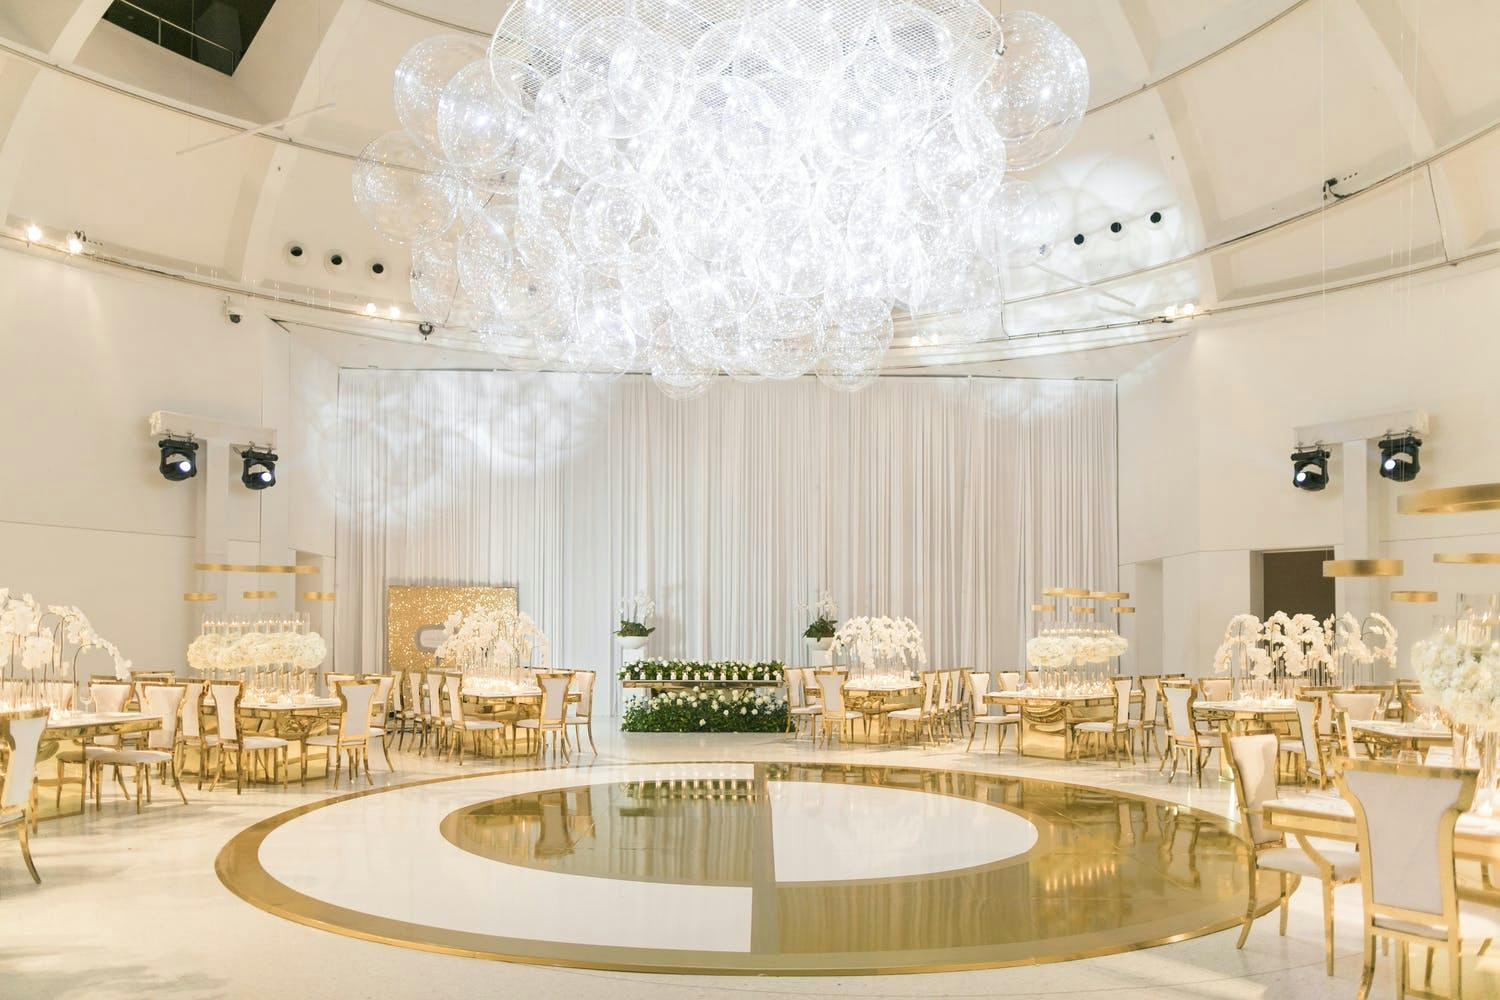 Wedding Ceremony With Yin and Yang-Inspired Gold and White Dance Floor and Lacey Bubble-Like Lighting installation | PartySlate